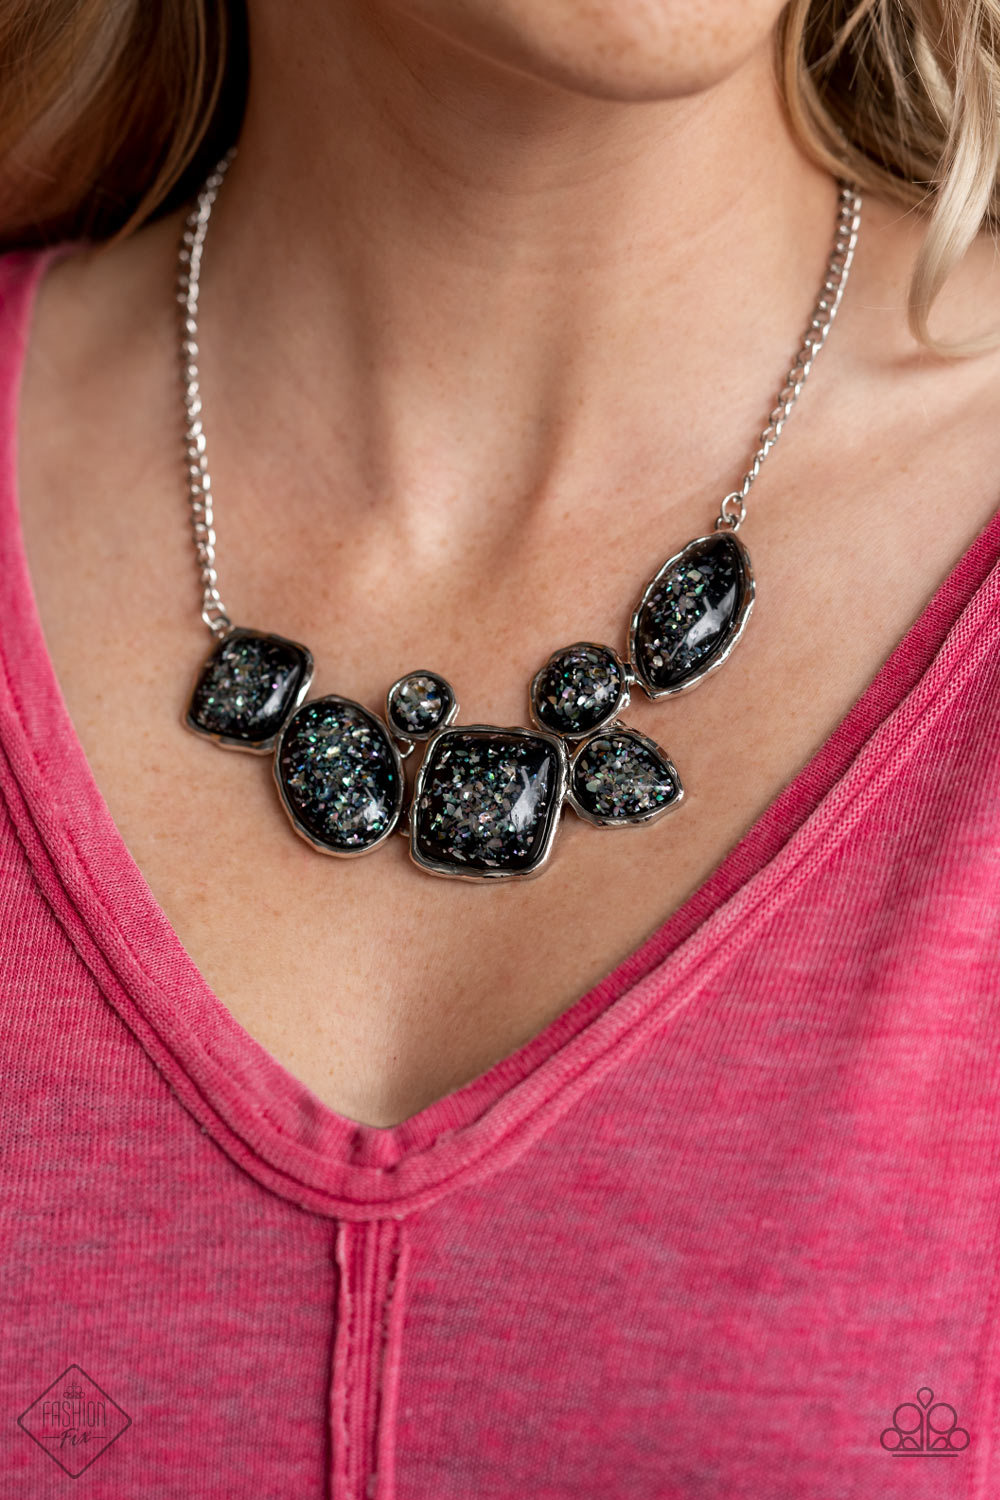 So Jelly Black Paparazzi Necklace Cashmere Pink Jewels 